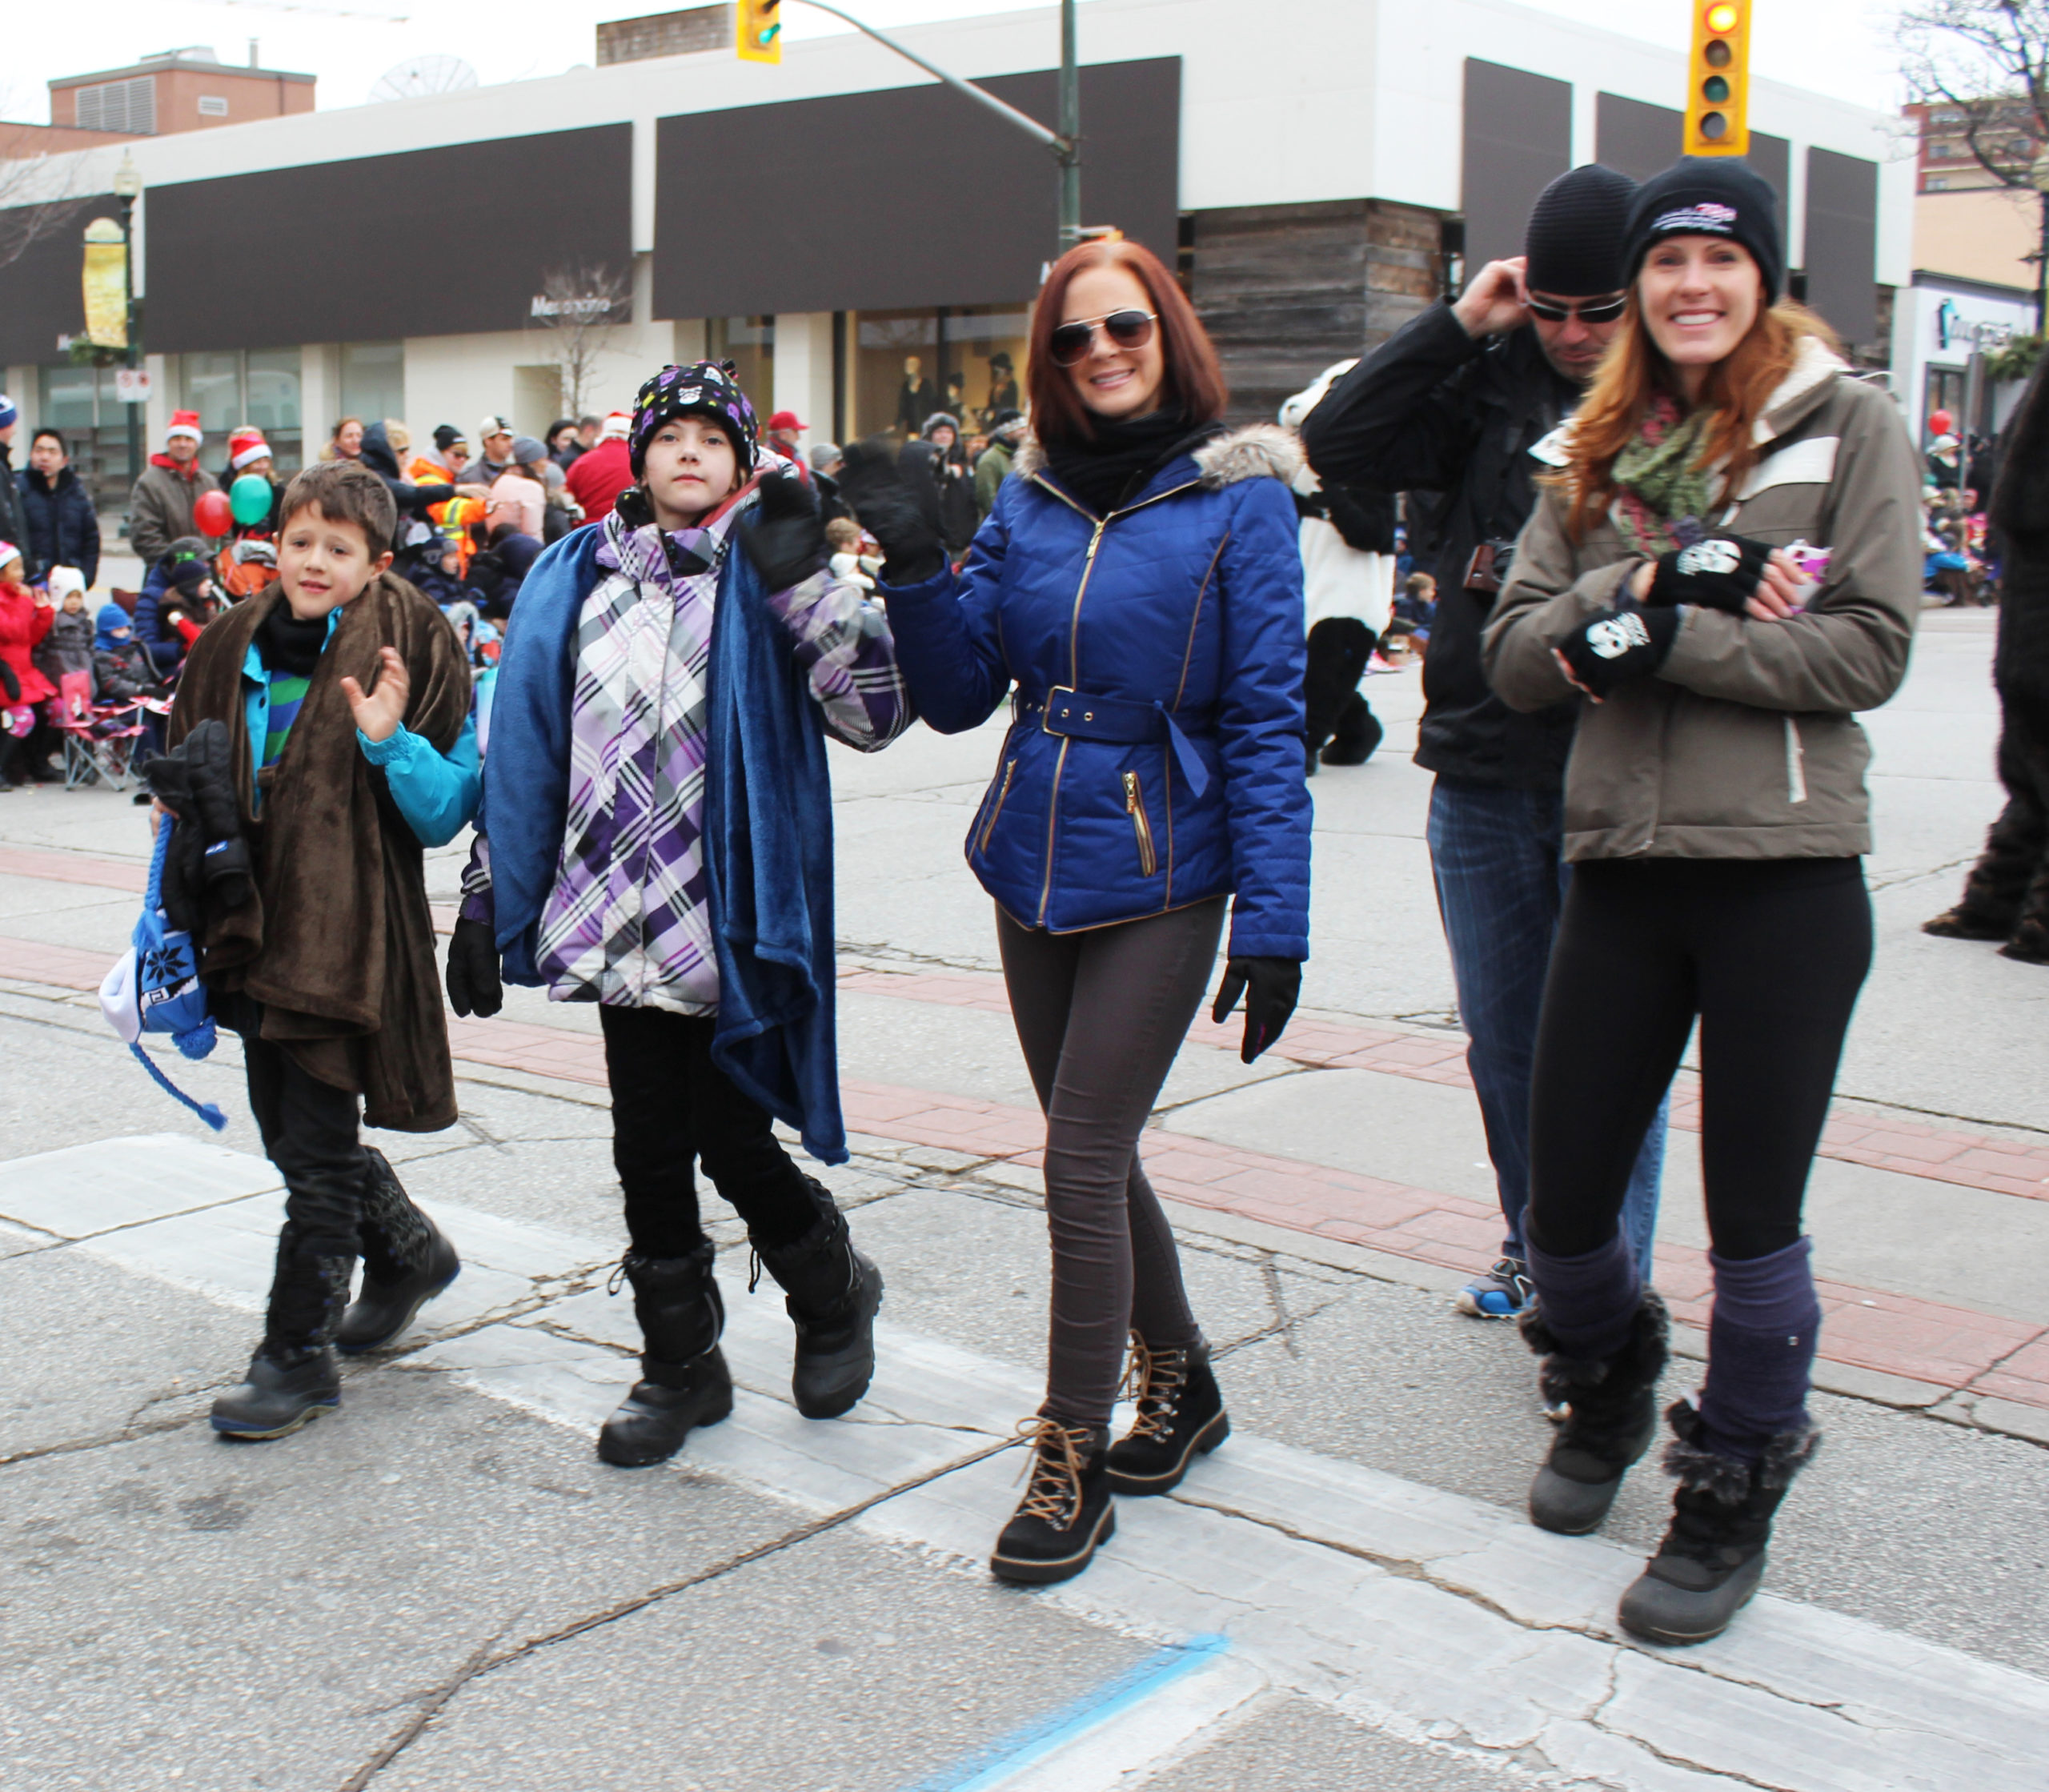 Families enjoy the parade in Oakville.